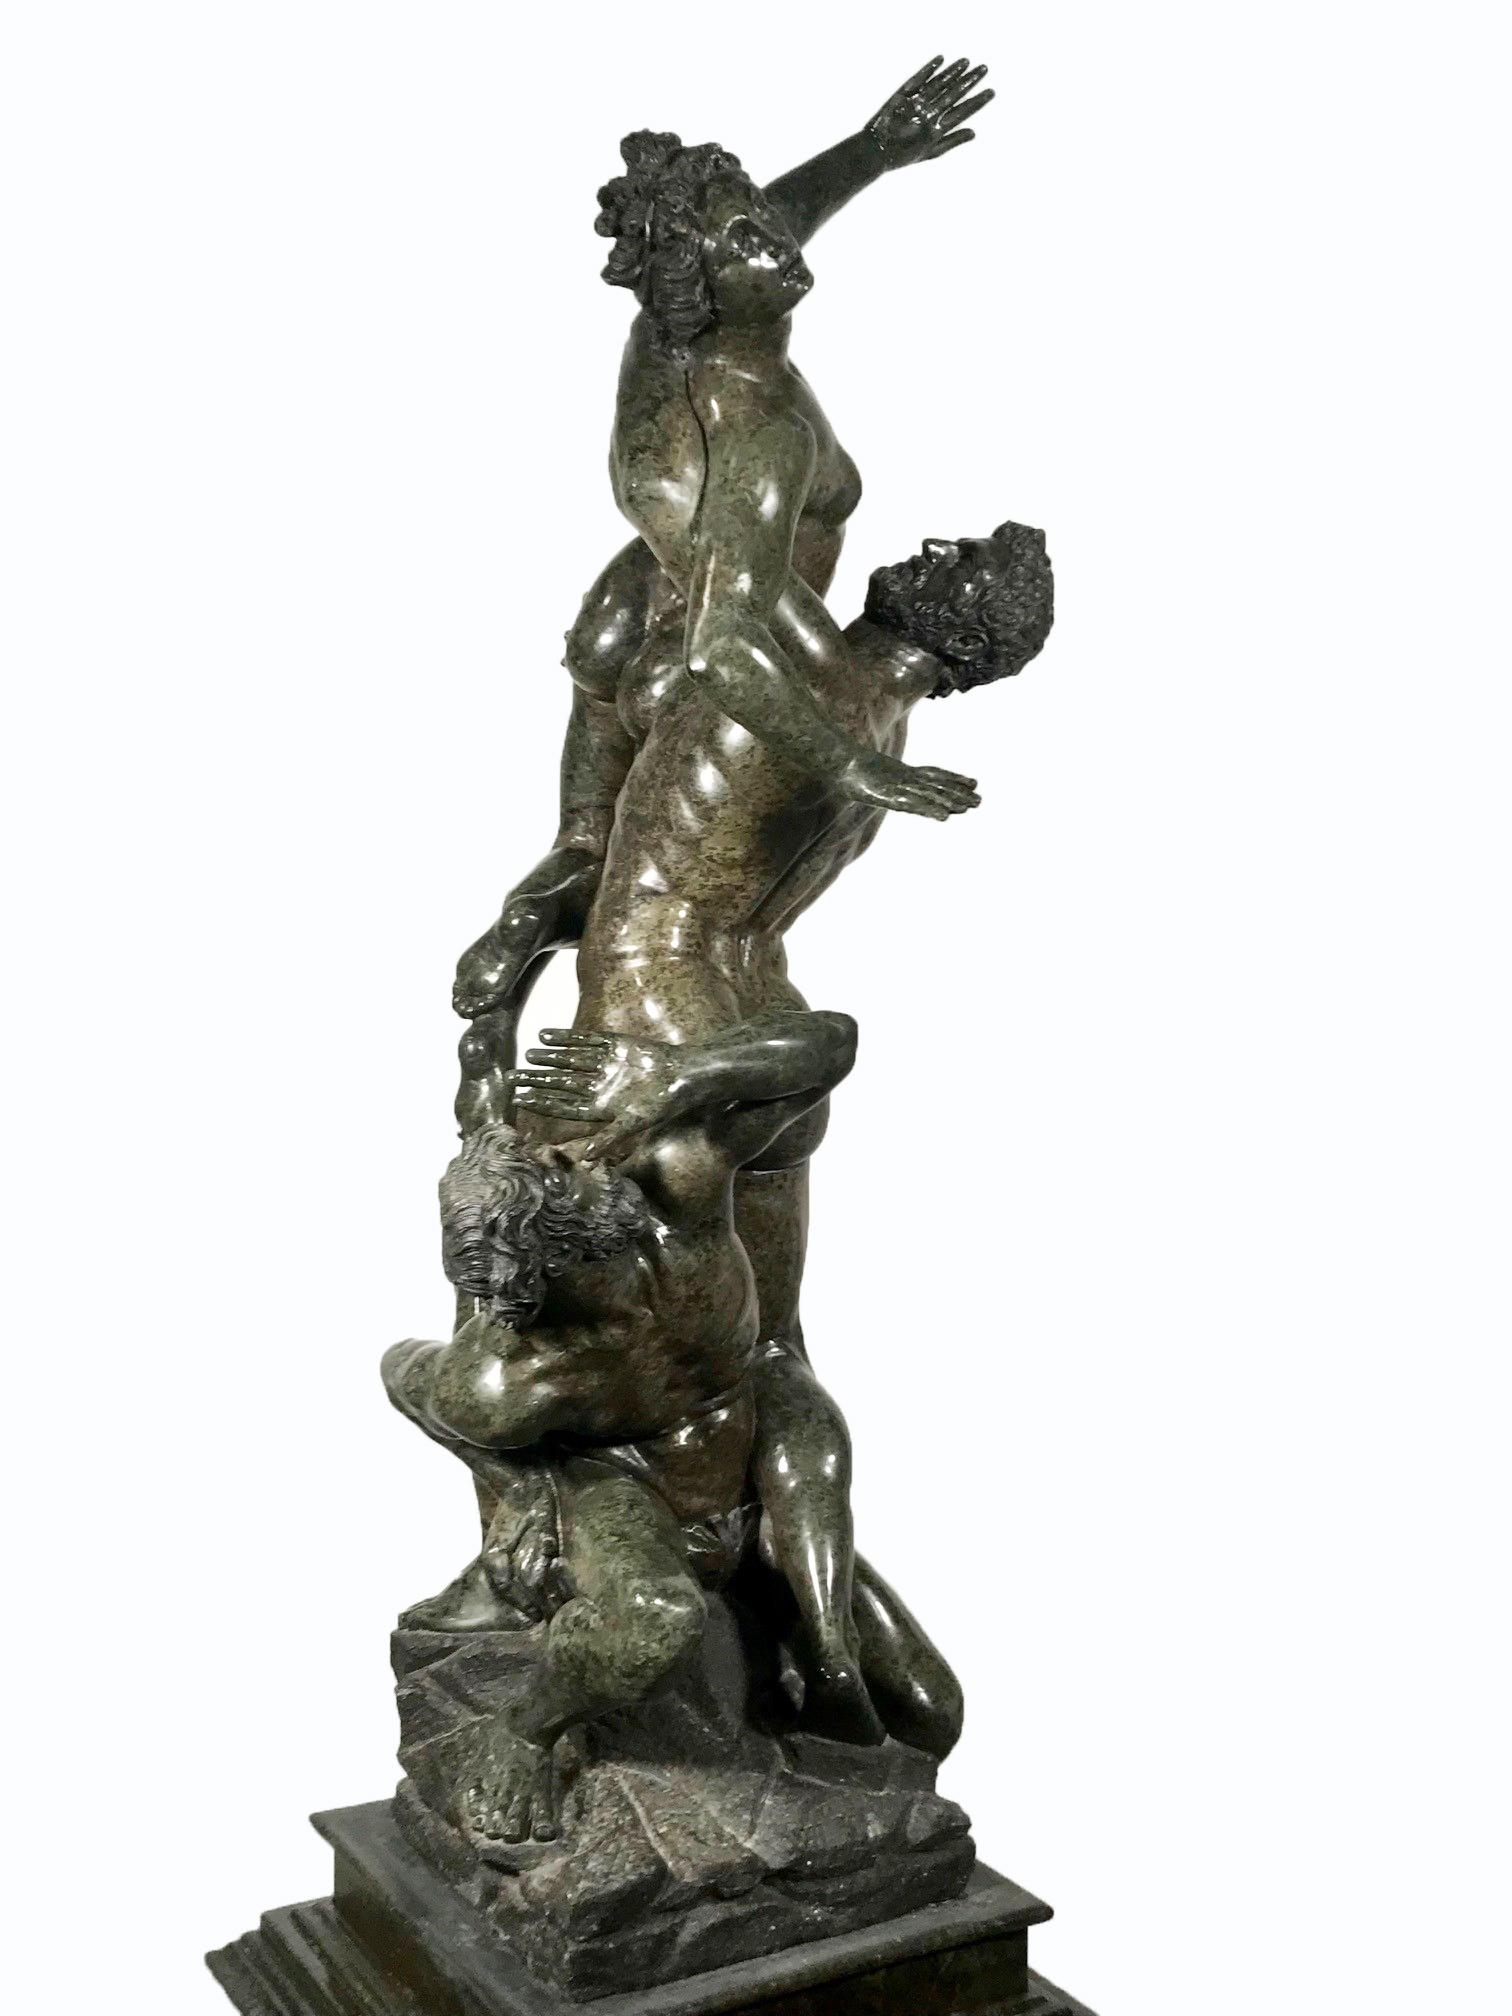 This fine 19th century copy of the famous group is in a sumptuous Serpentine marble. The Sabine man crouches in submissive pose, whilst the Roman carries off the writhing woman. It is well-presented on the original matching plinth and pedestal .